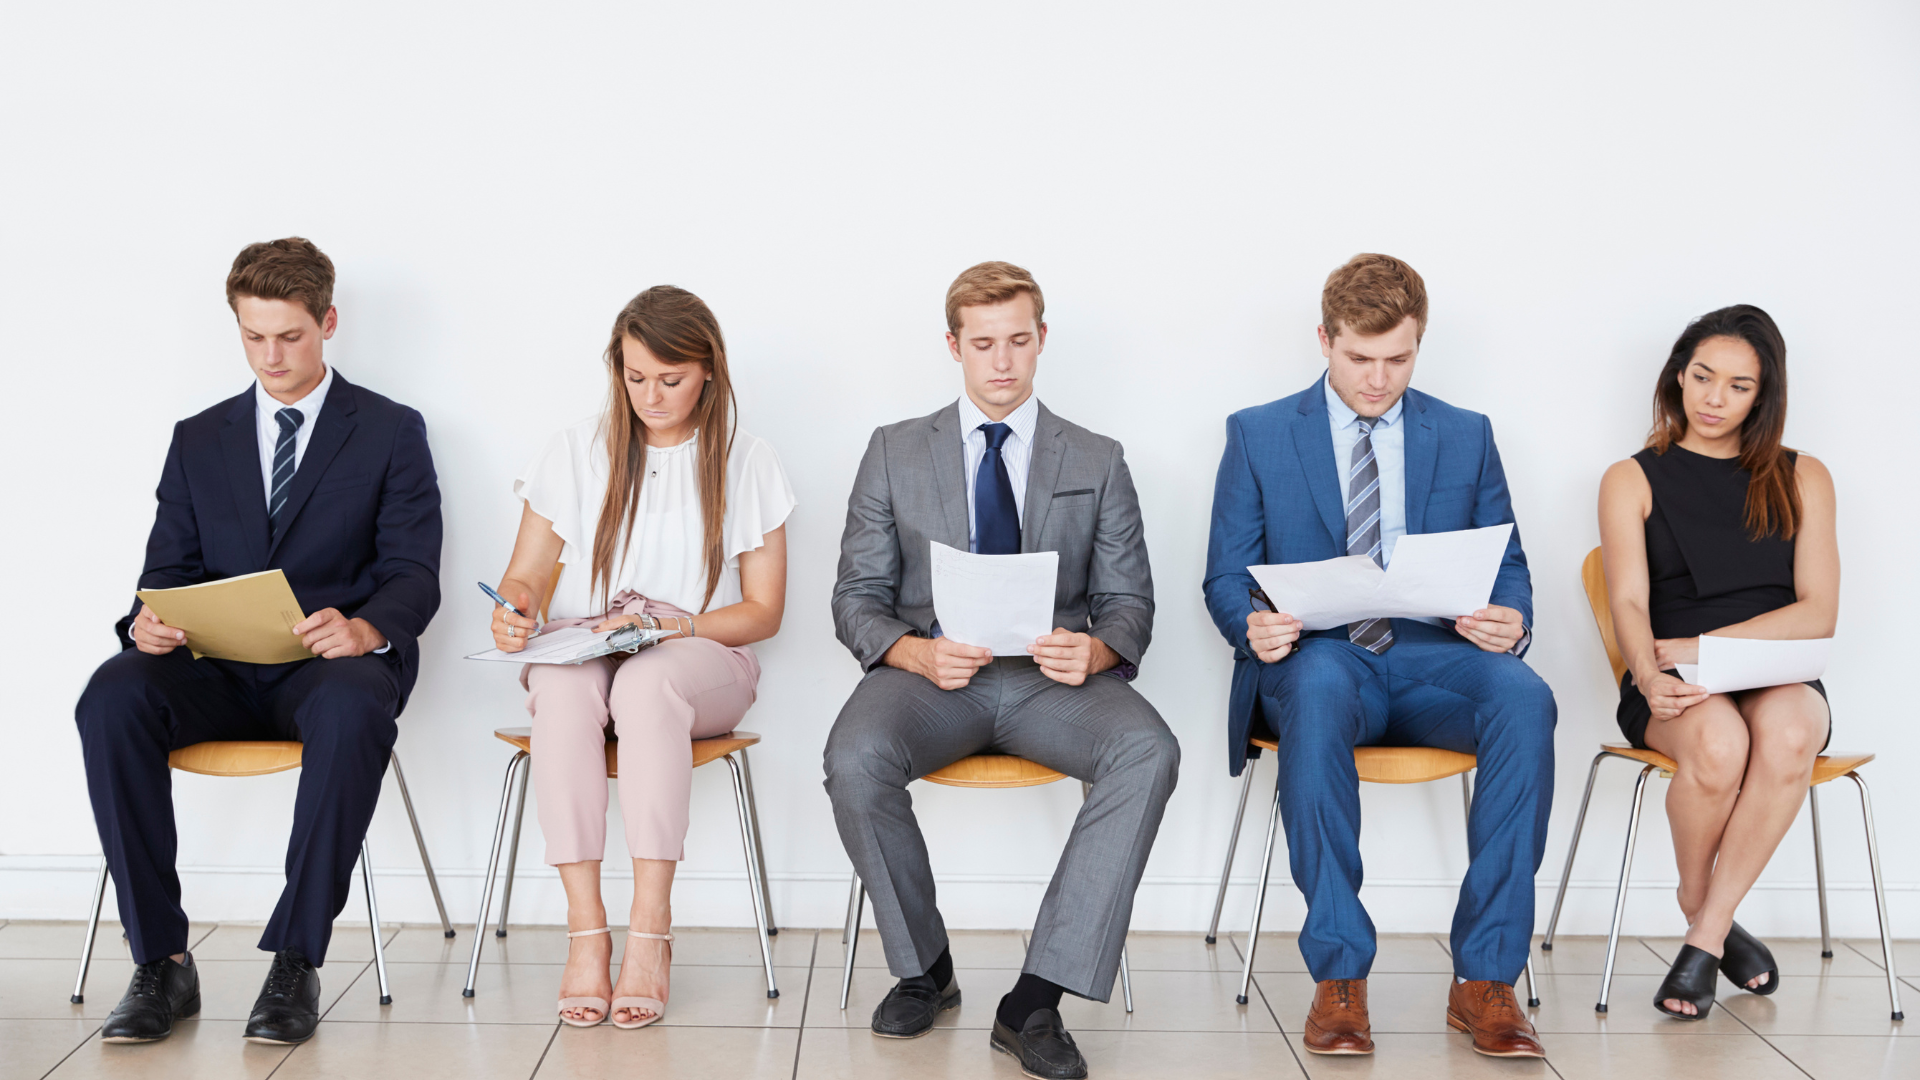 How to Attract Millennial Candidates for Your Business